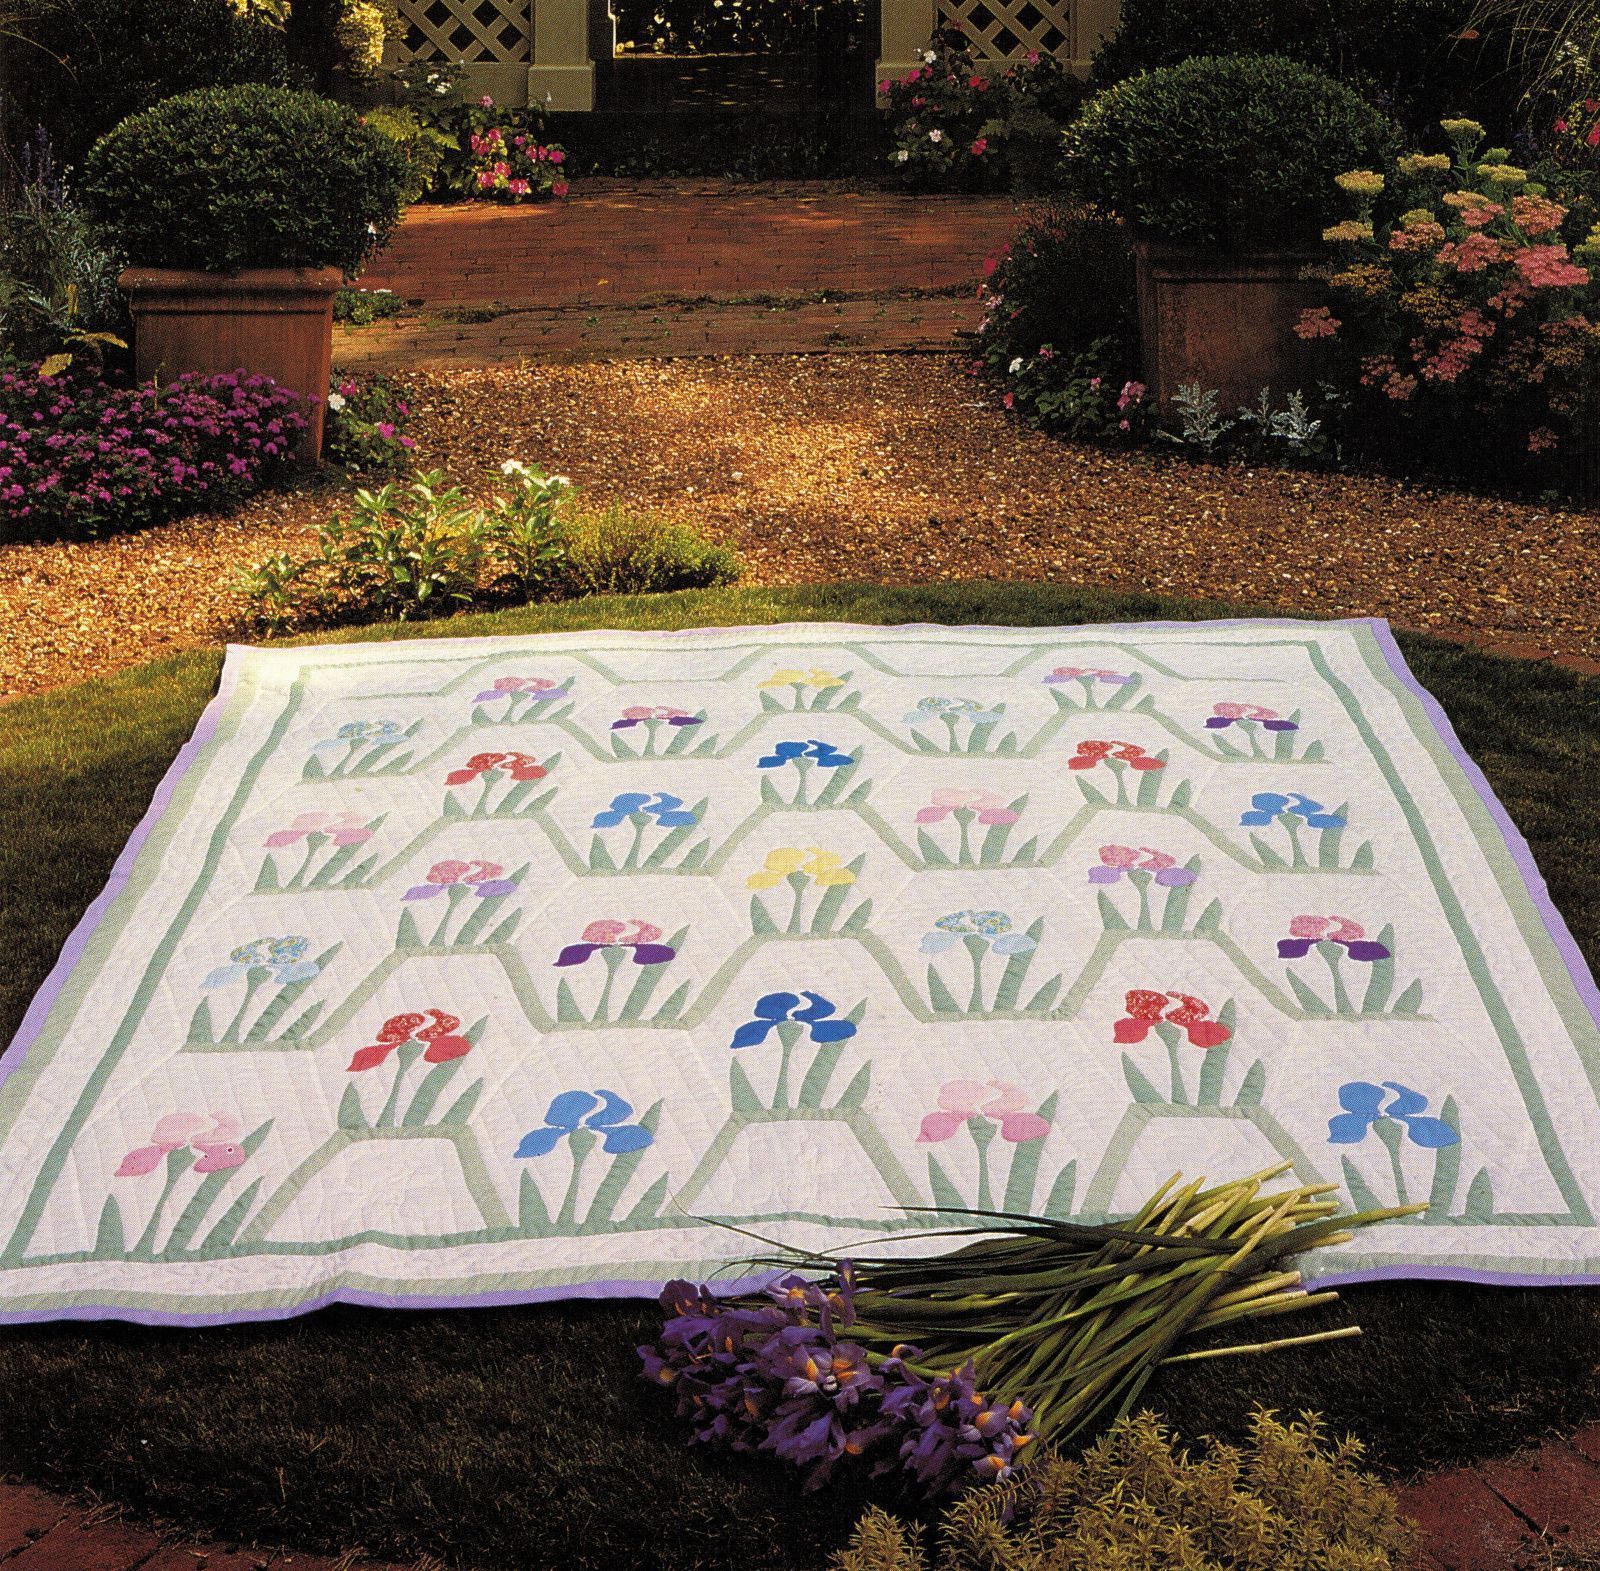 Primary image for Best Loved Quilt Garden Iris Applique Sew Pattern Flexible Plastic Template